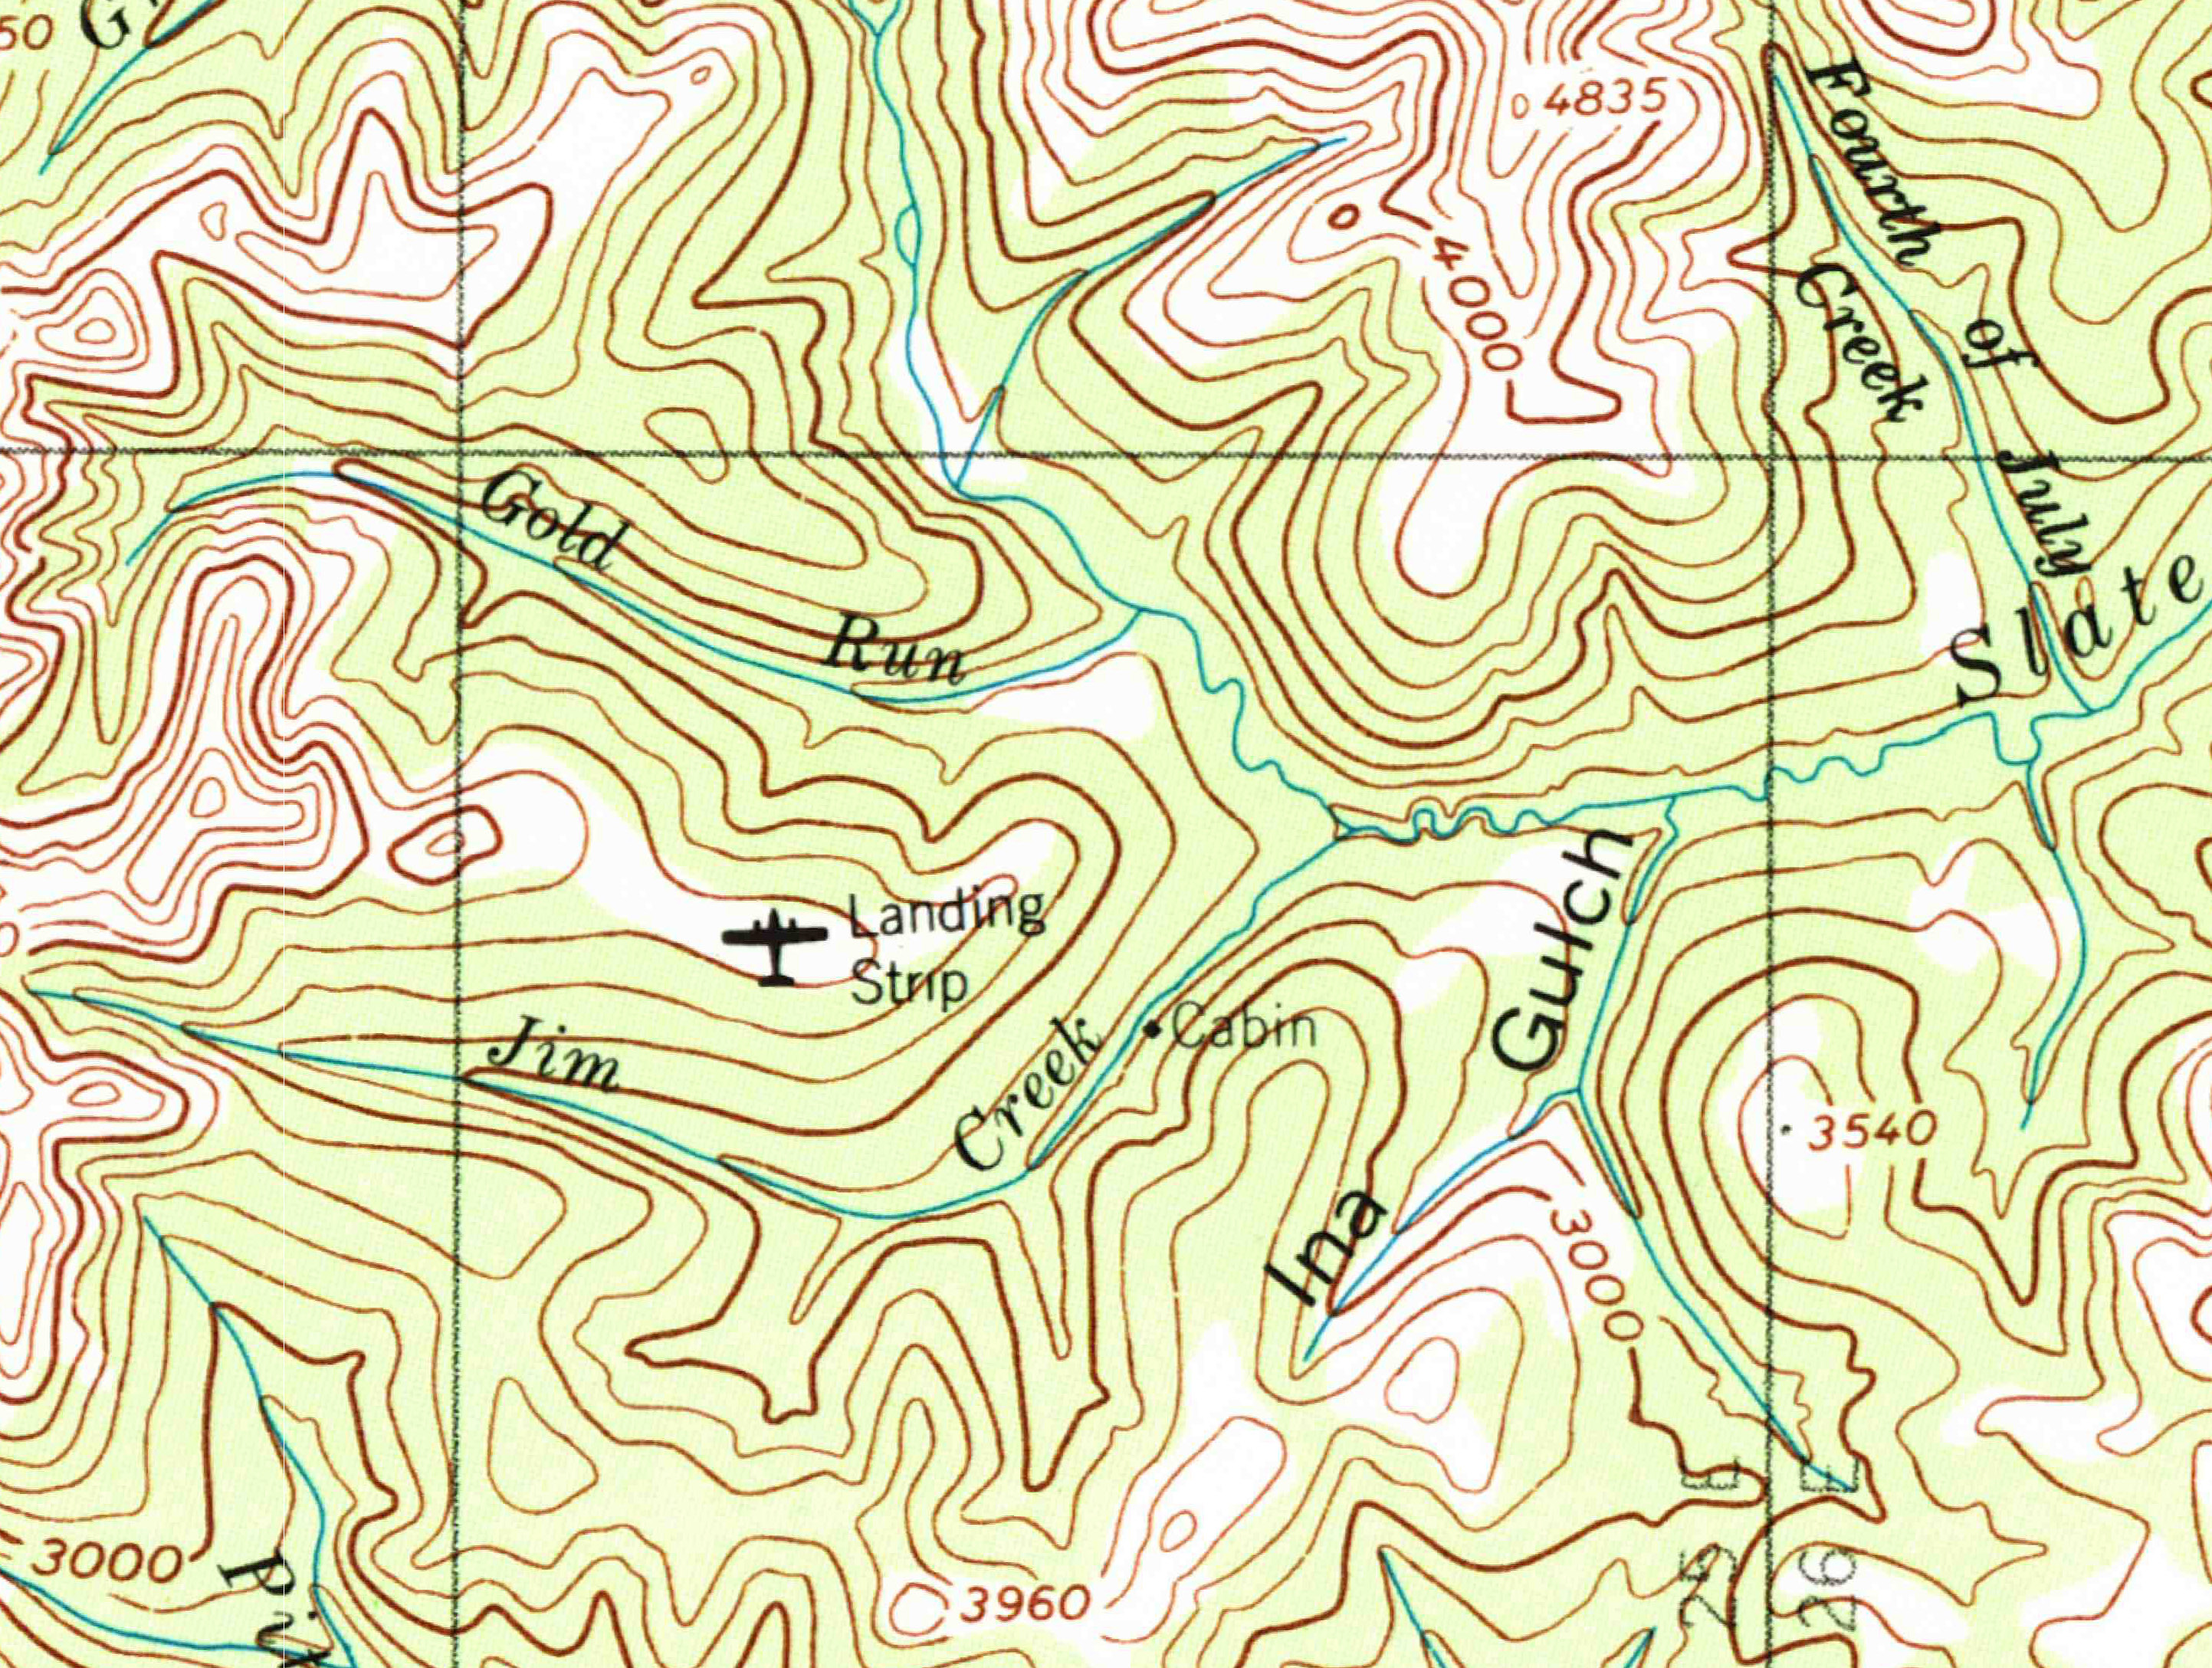 HRA staff used USGS topographical maps like this one to investigate when airfields were constructed in a remote part of Alaska.